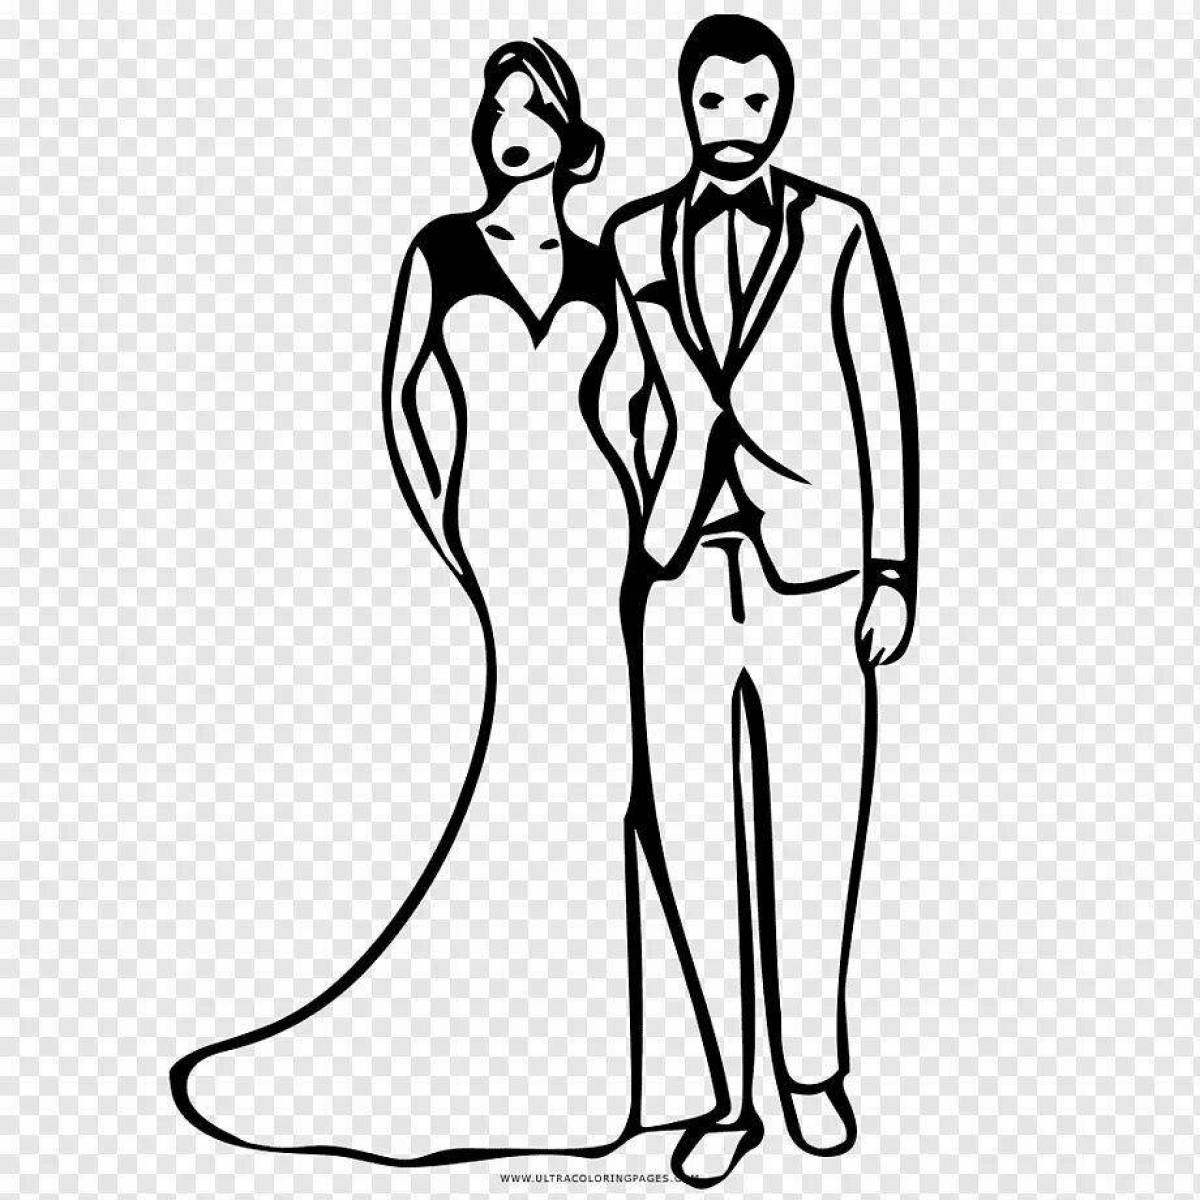 Amazing bride and groom coloring page